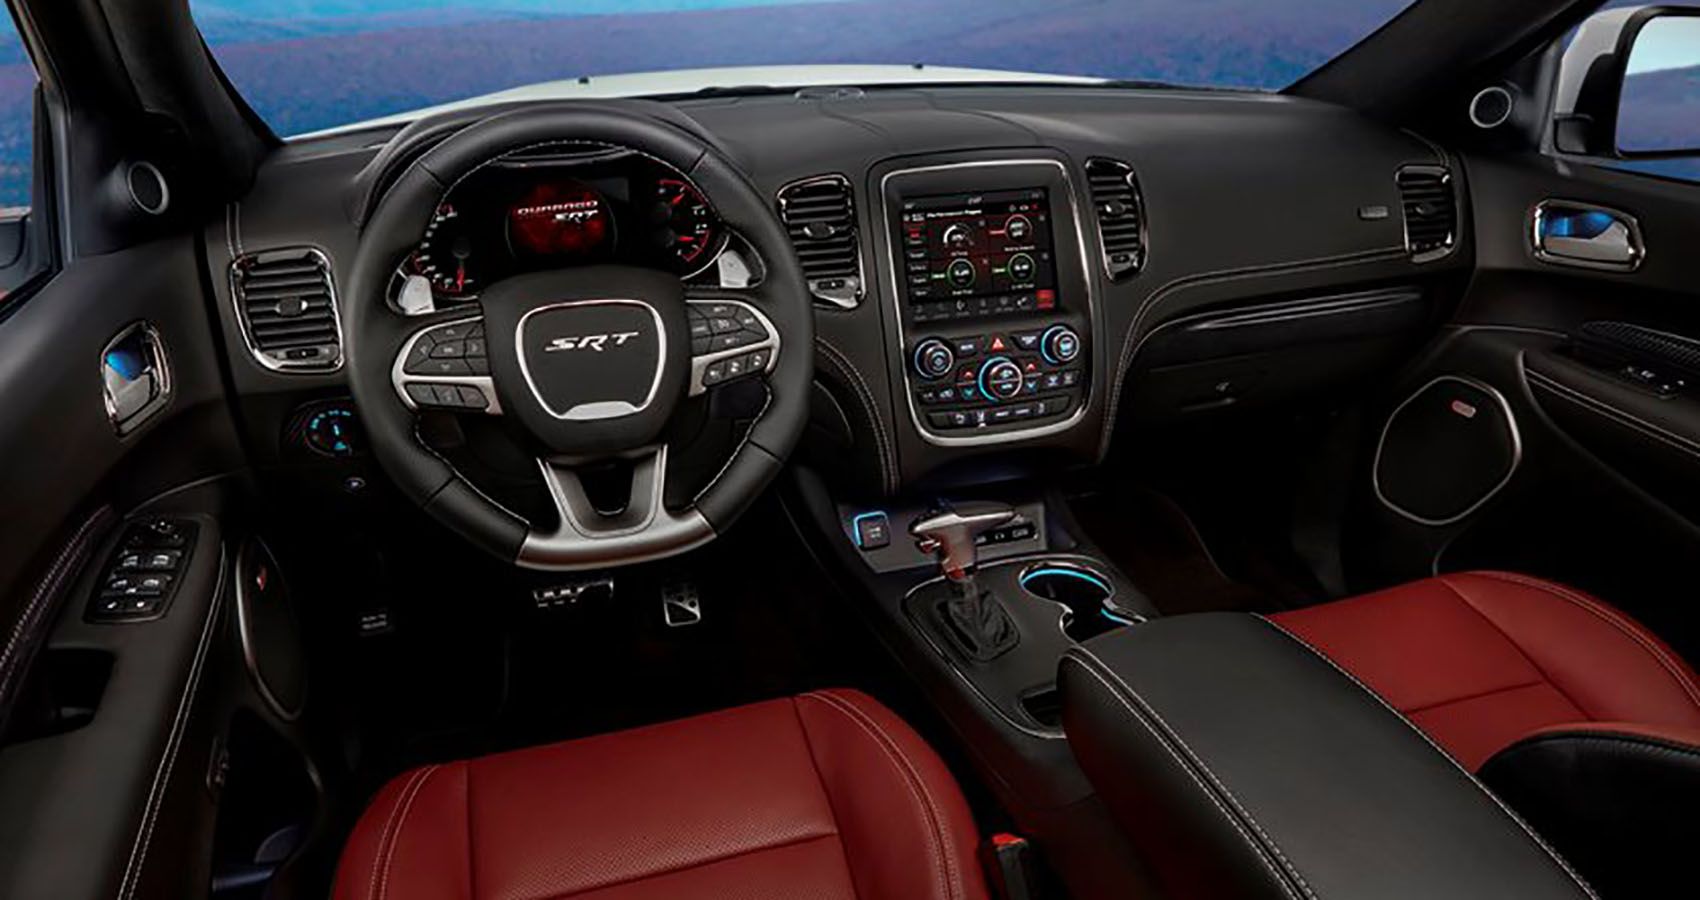 A Detailed Look At The Dodge Durango SRT's Interior